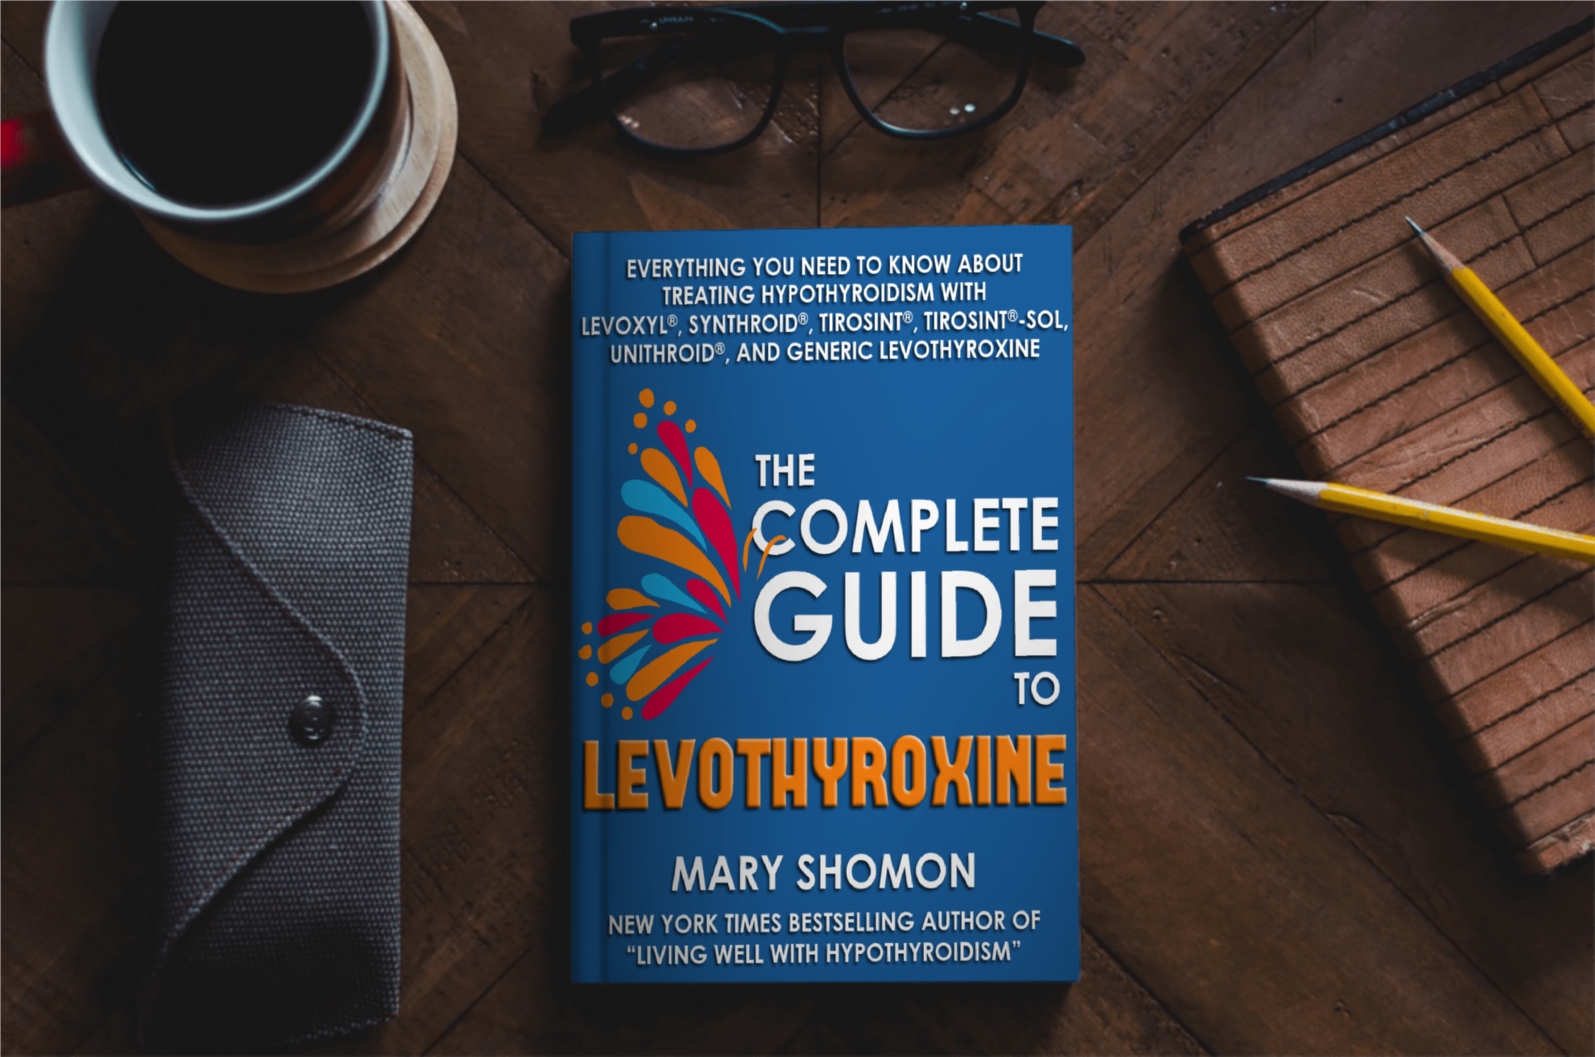 The Complete Guide to Levothyroxine is a free book included in the Levothyroxine Deep Dive Program